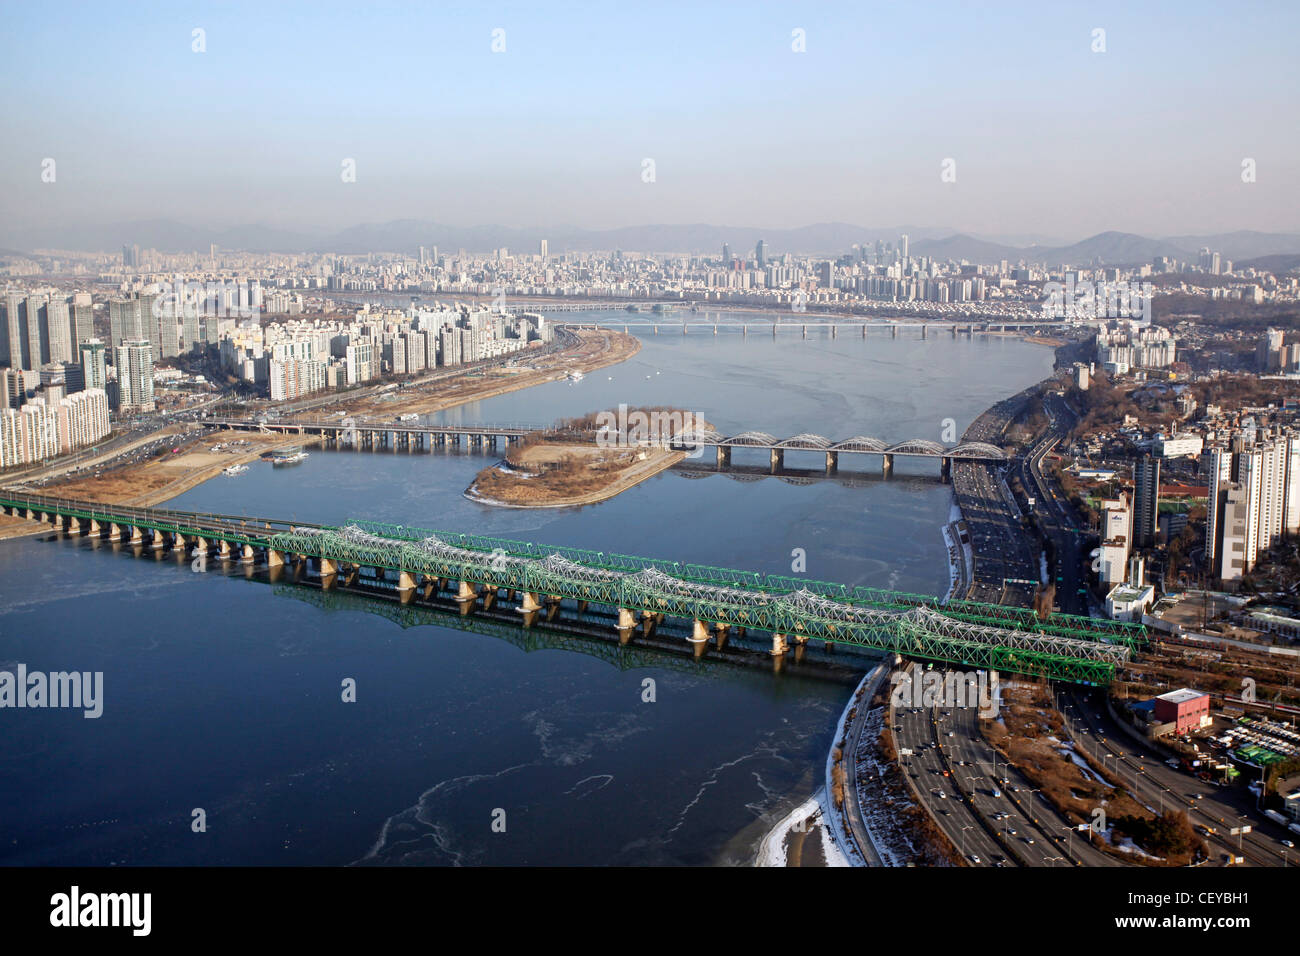 The Han River and bridges with the city skyline in Seoul, South Korea Stock Photo